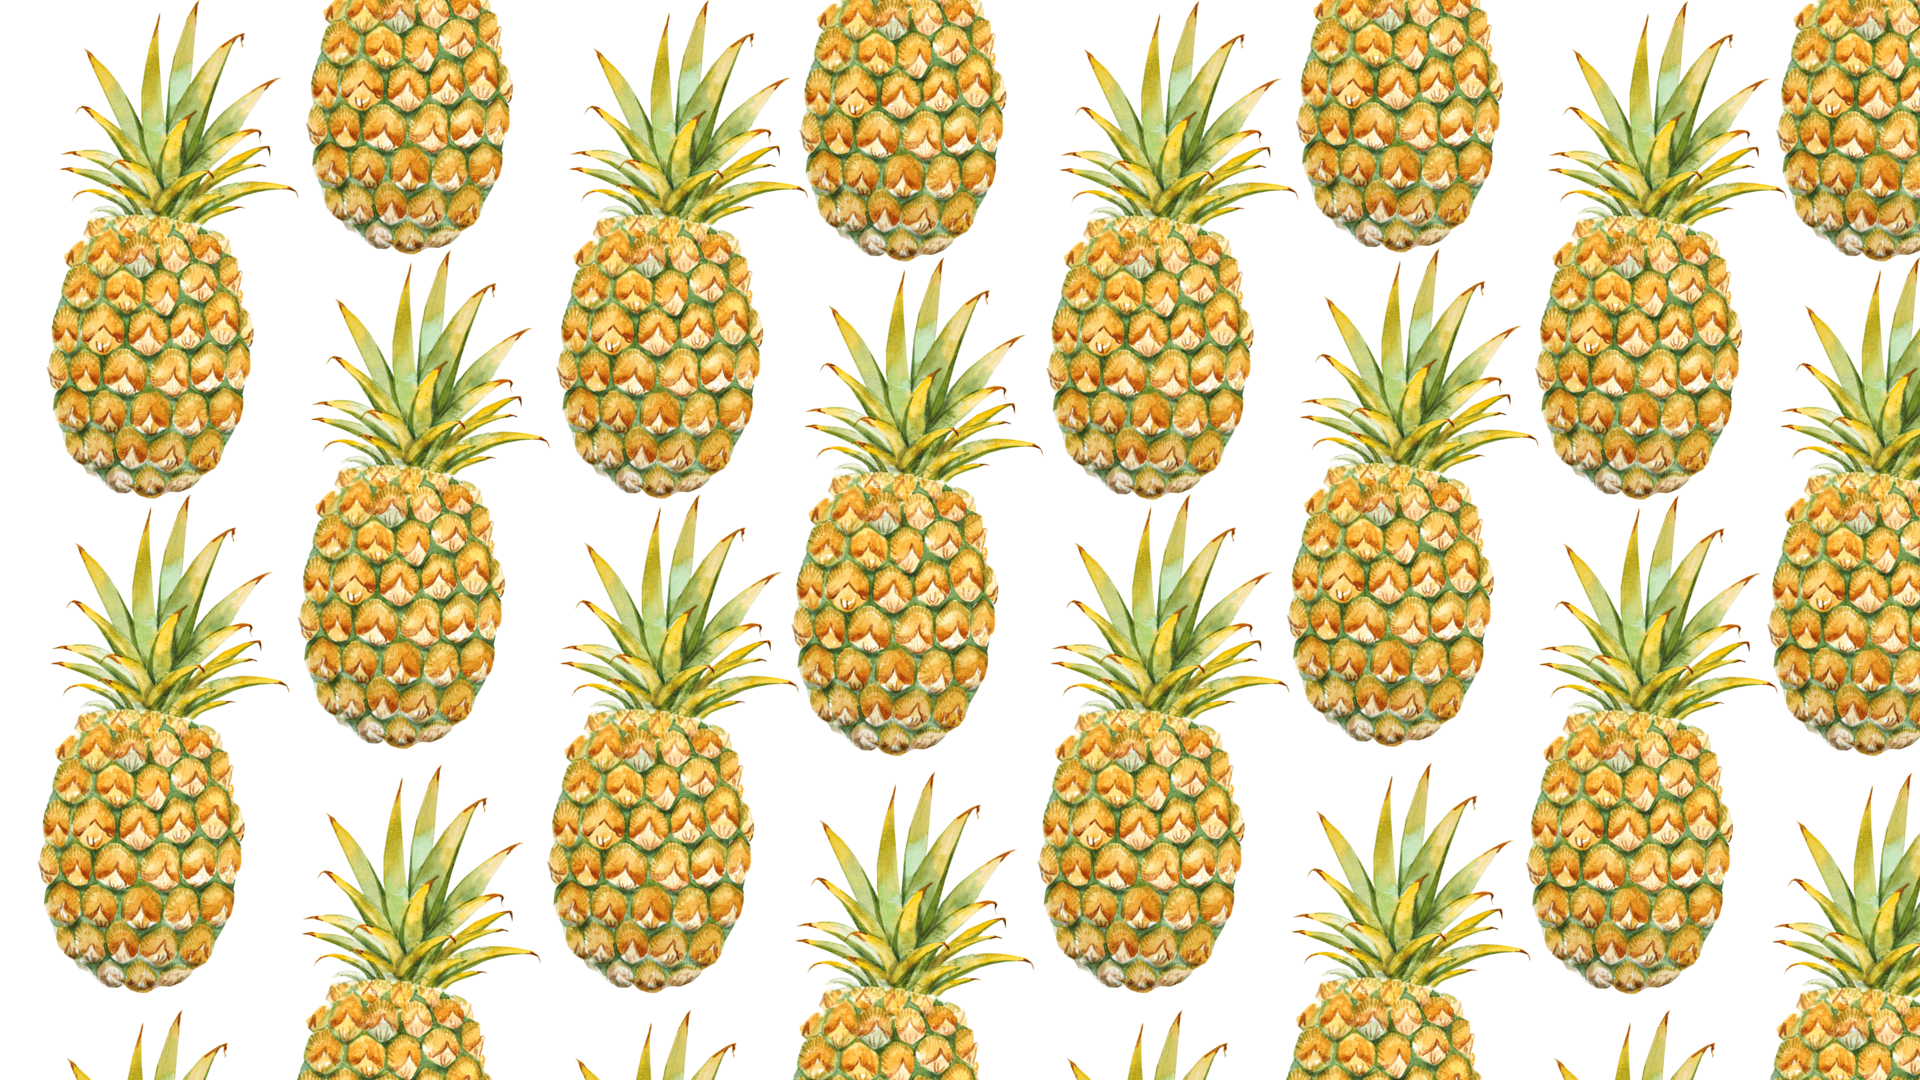 Pineapple For Computer Wallpapers Wallpaper Cave.